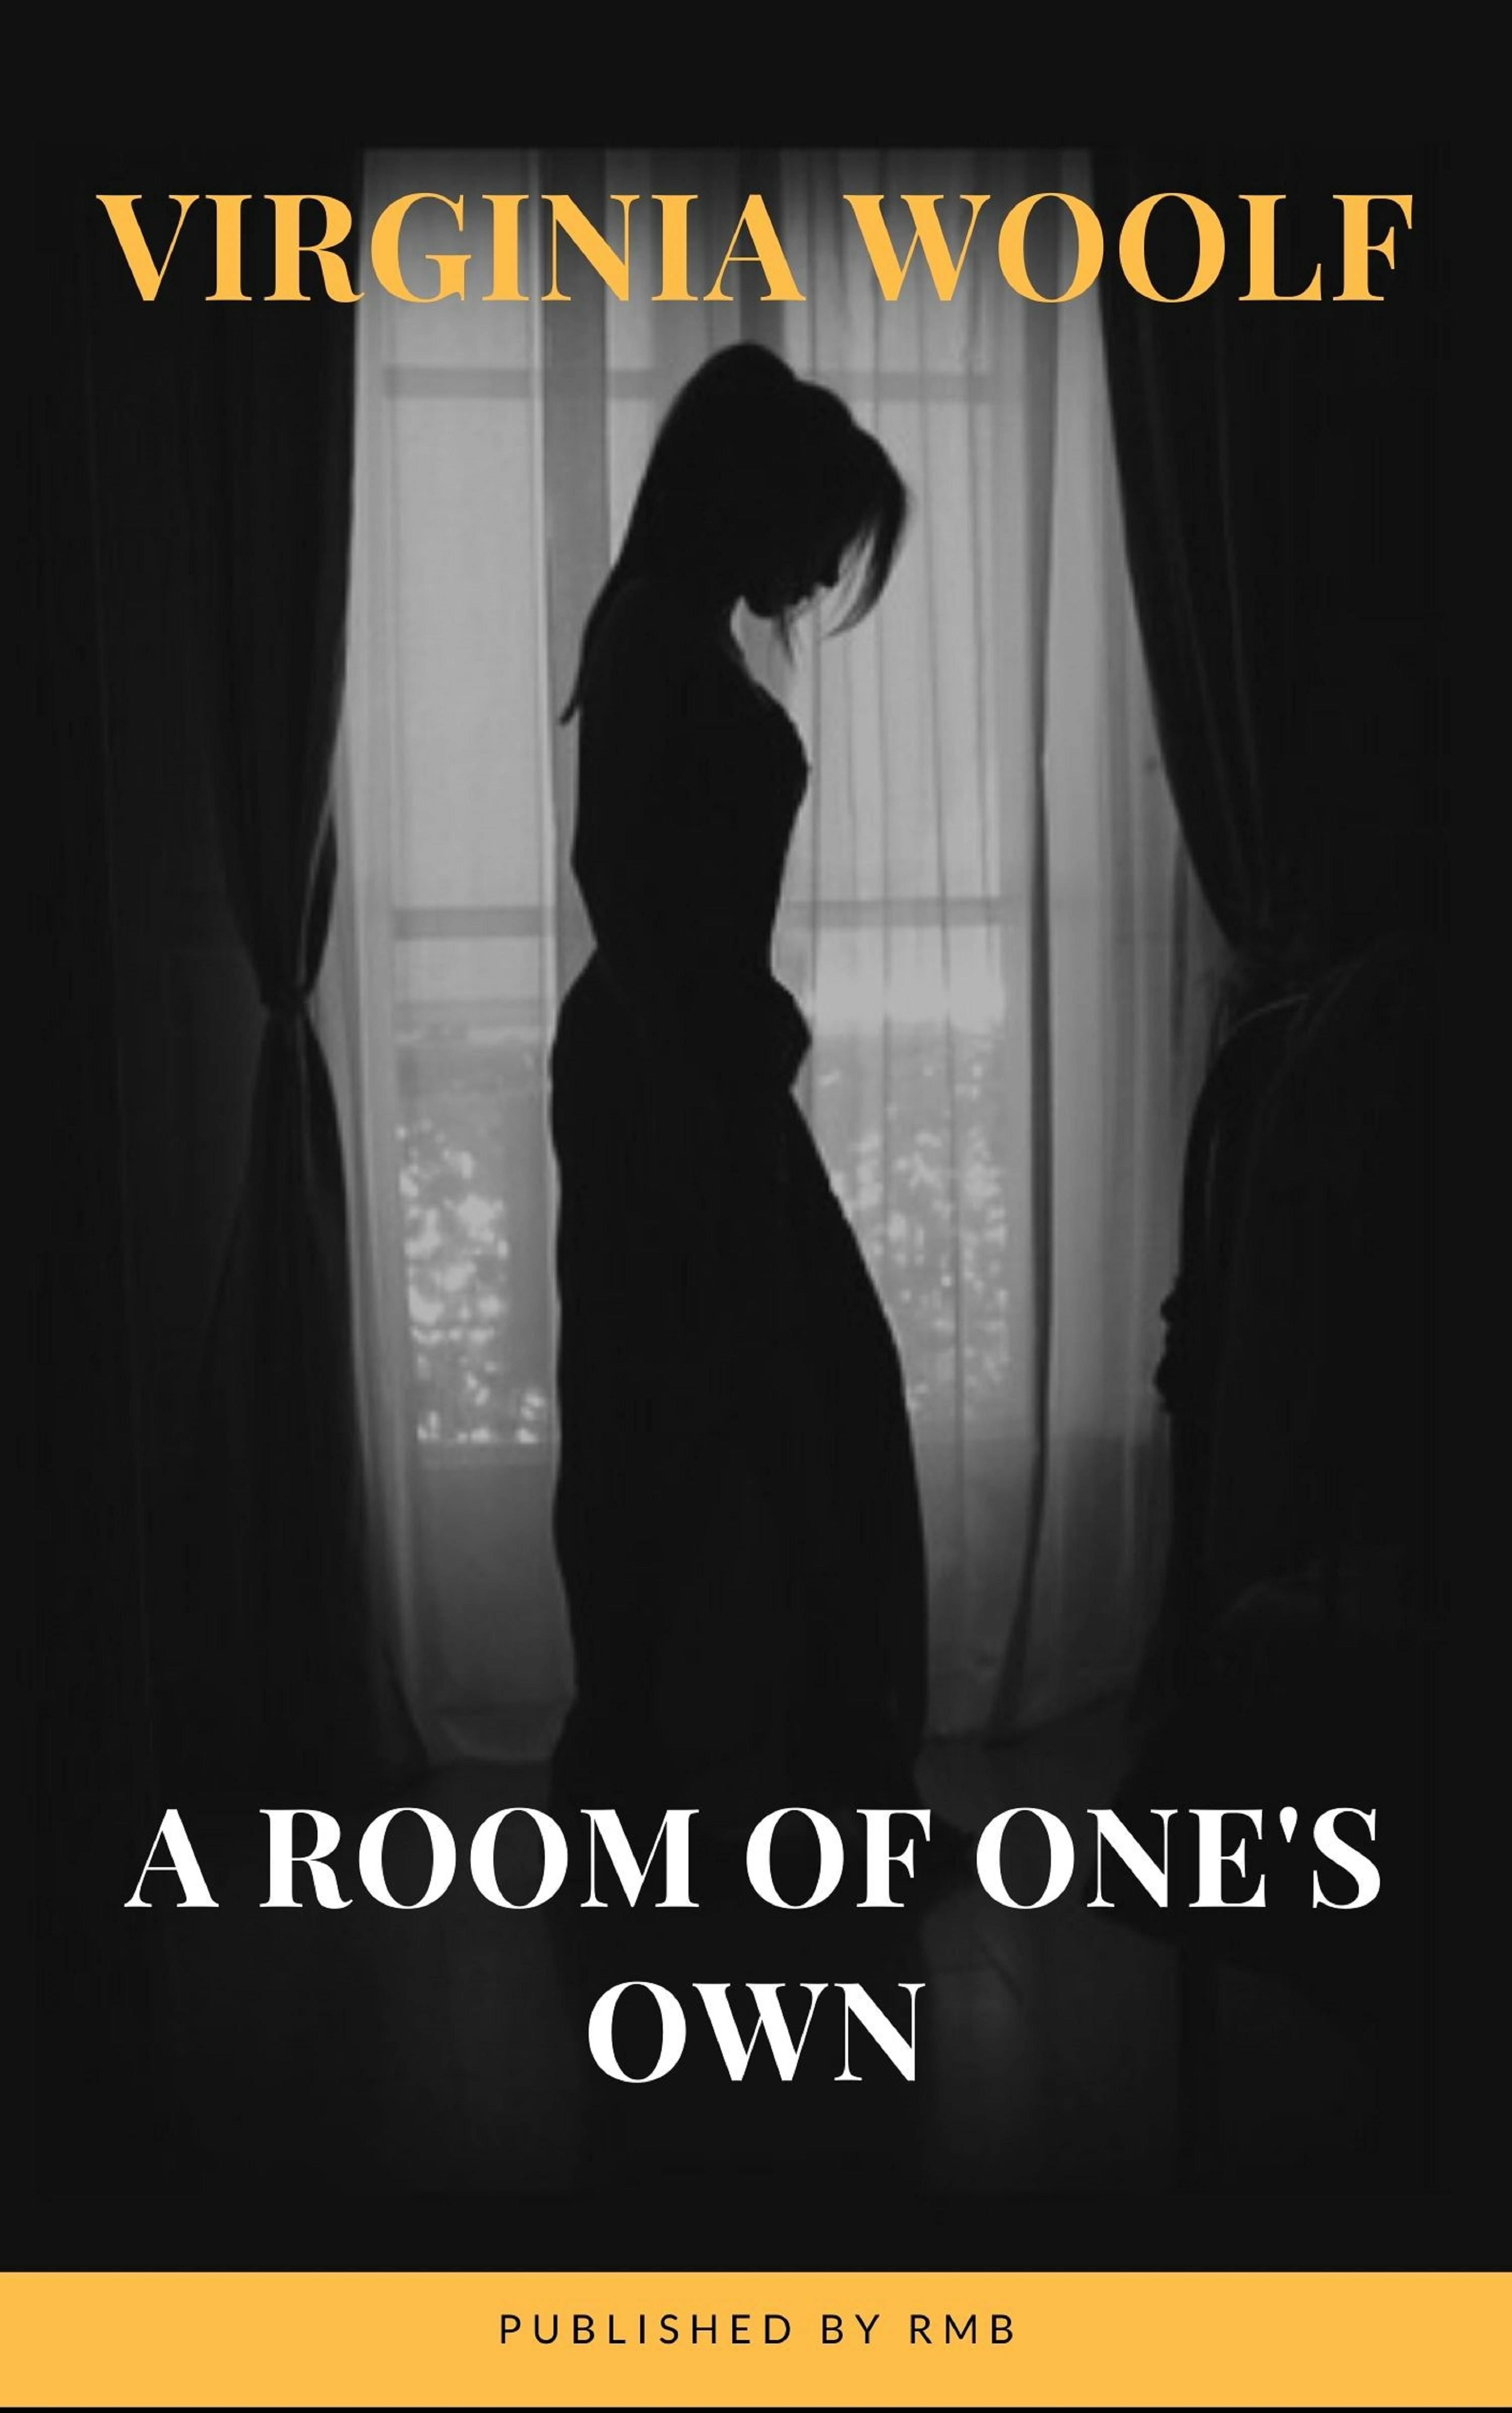 A Room of One's Own - Virginia Woolf, RMB